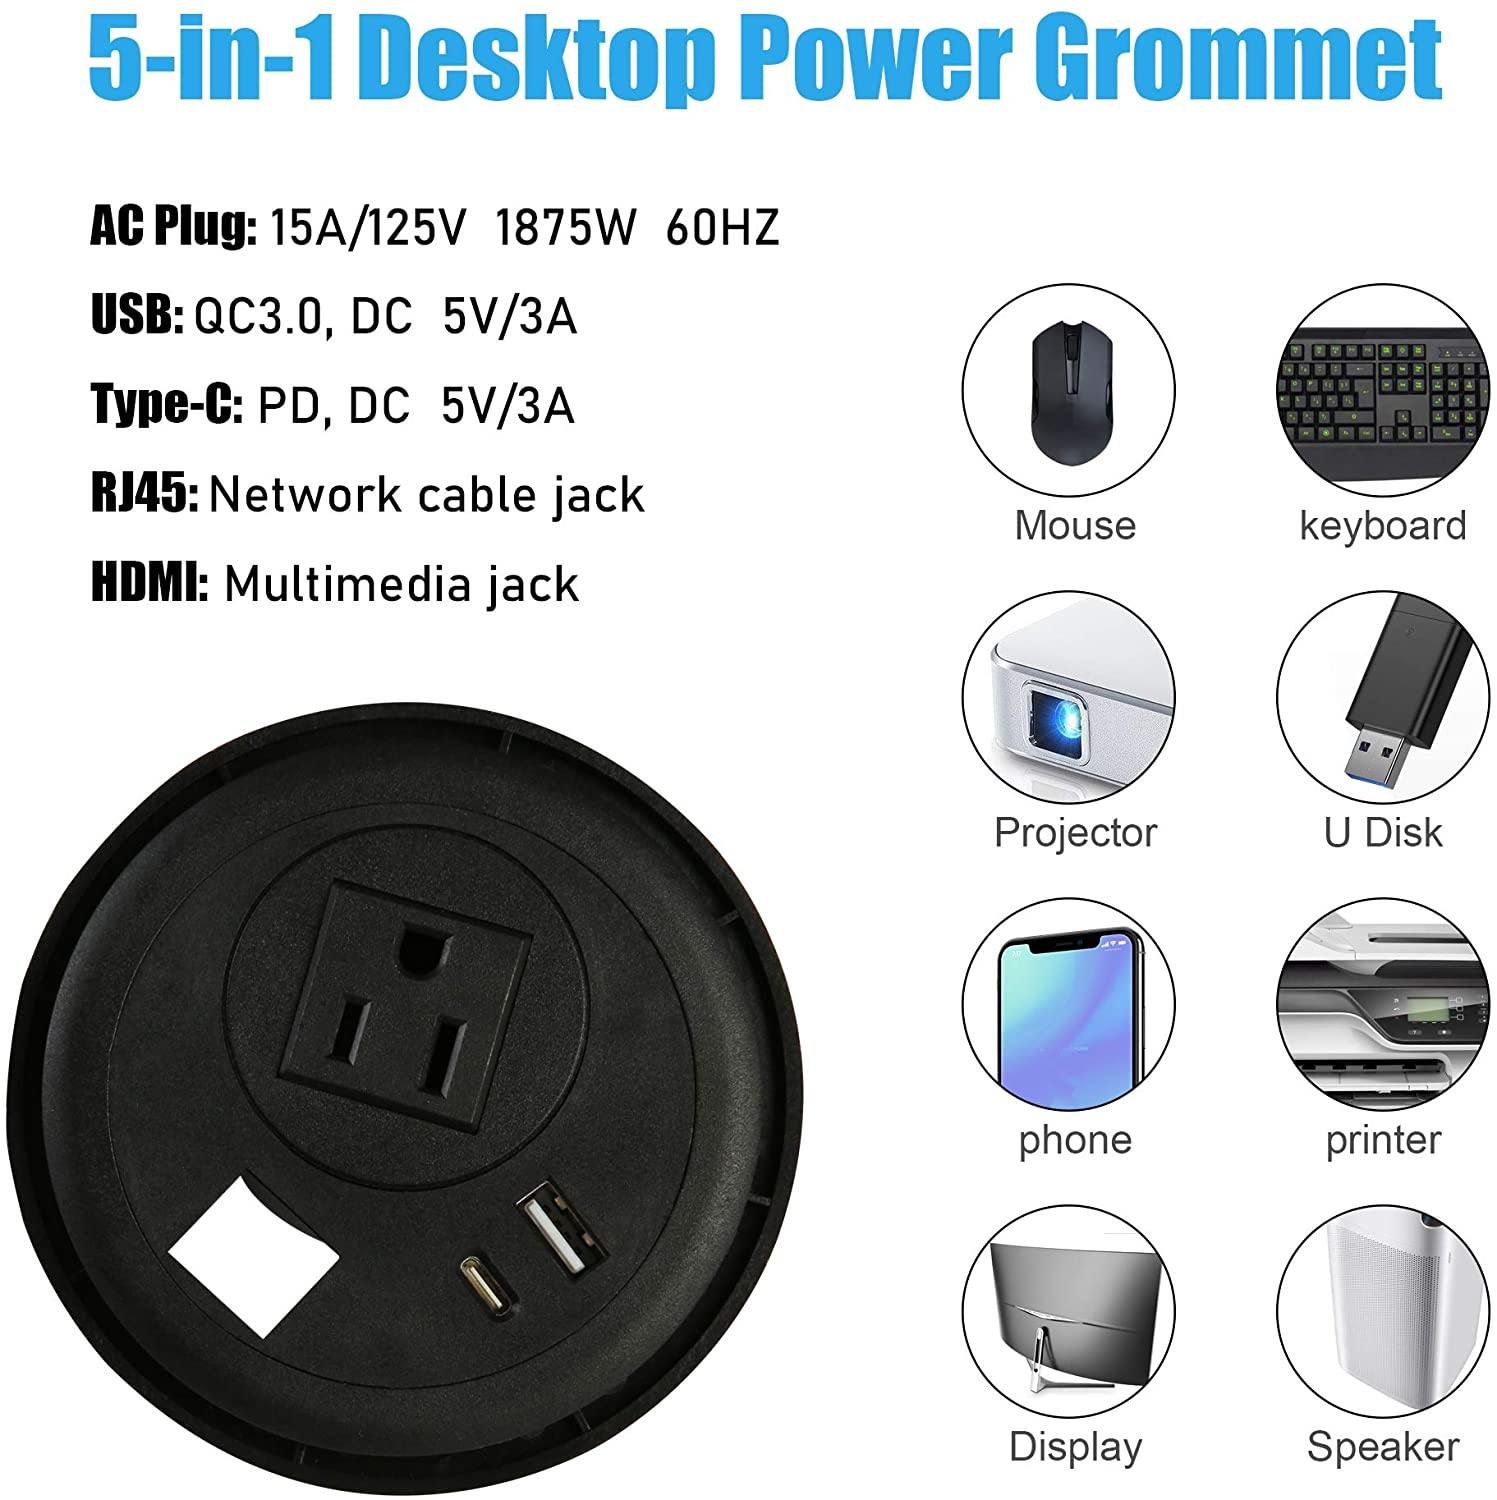 Desktop Power Grommet Outlet with USB, Recessed Power Strip with AC Outlet & USB(Type A & Type C) & Receptacle Outlet(RJ45, HDMI) - Bosonshop